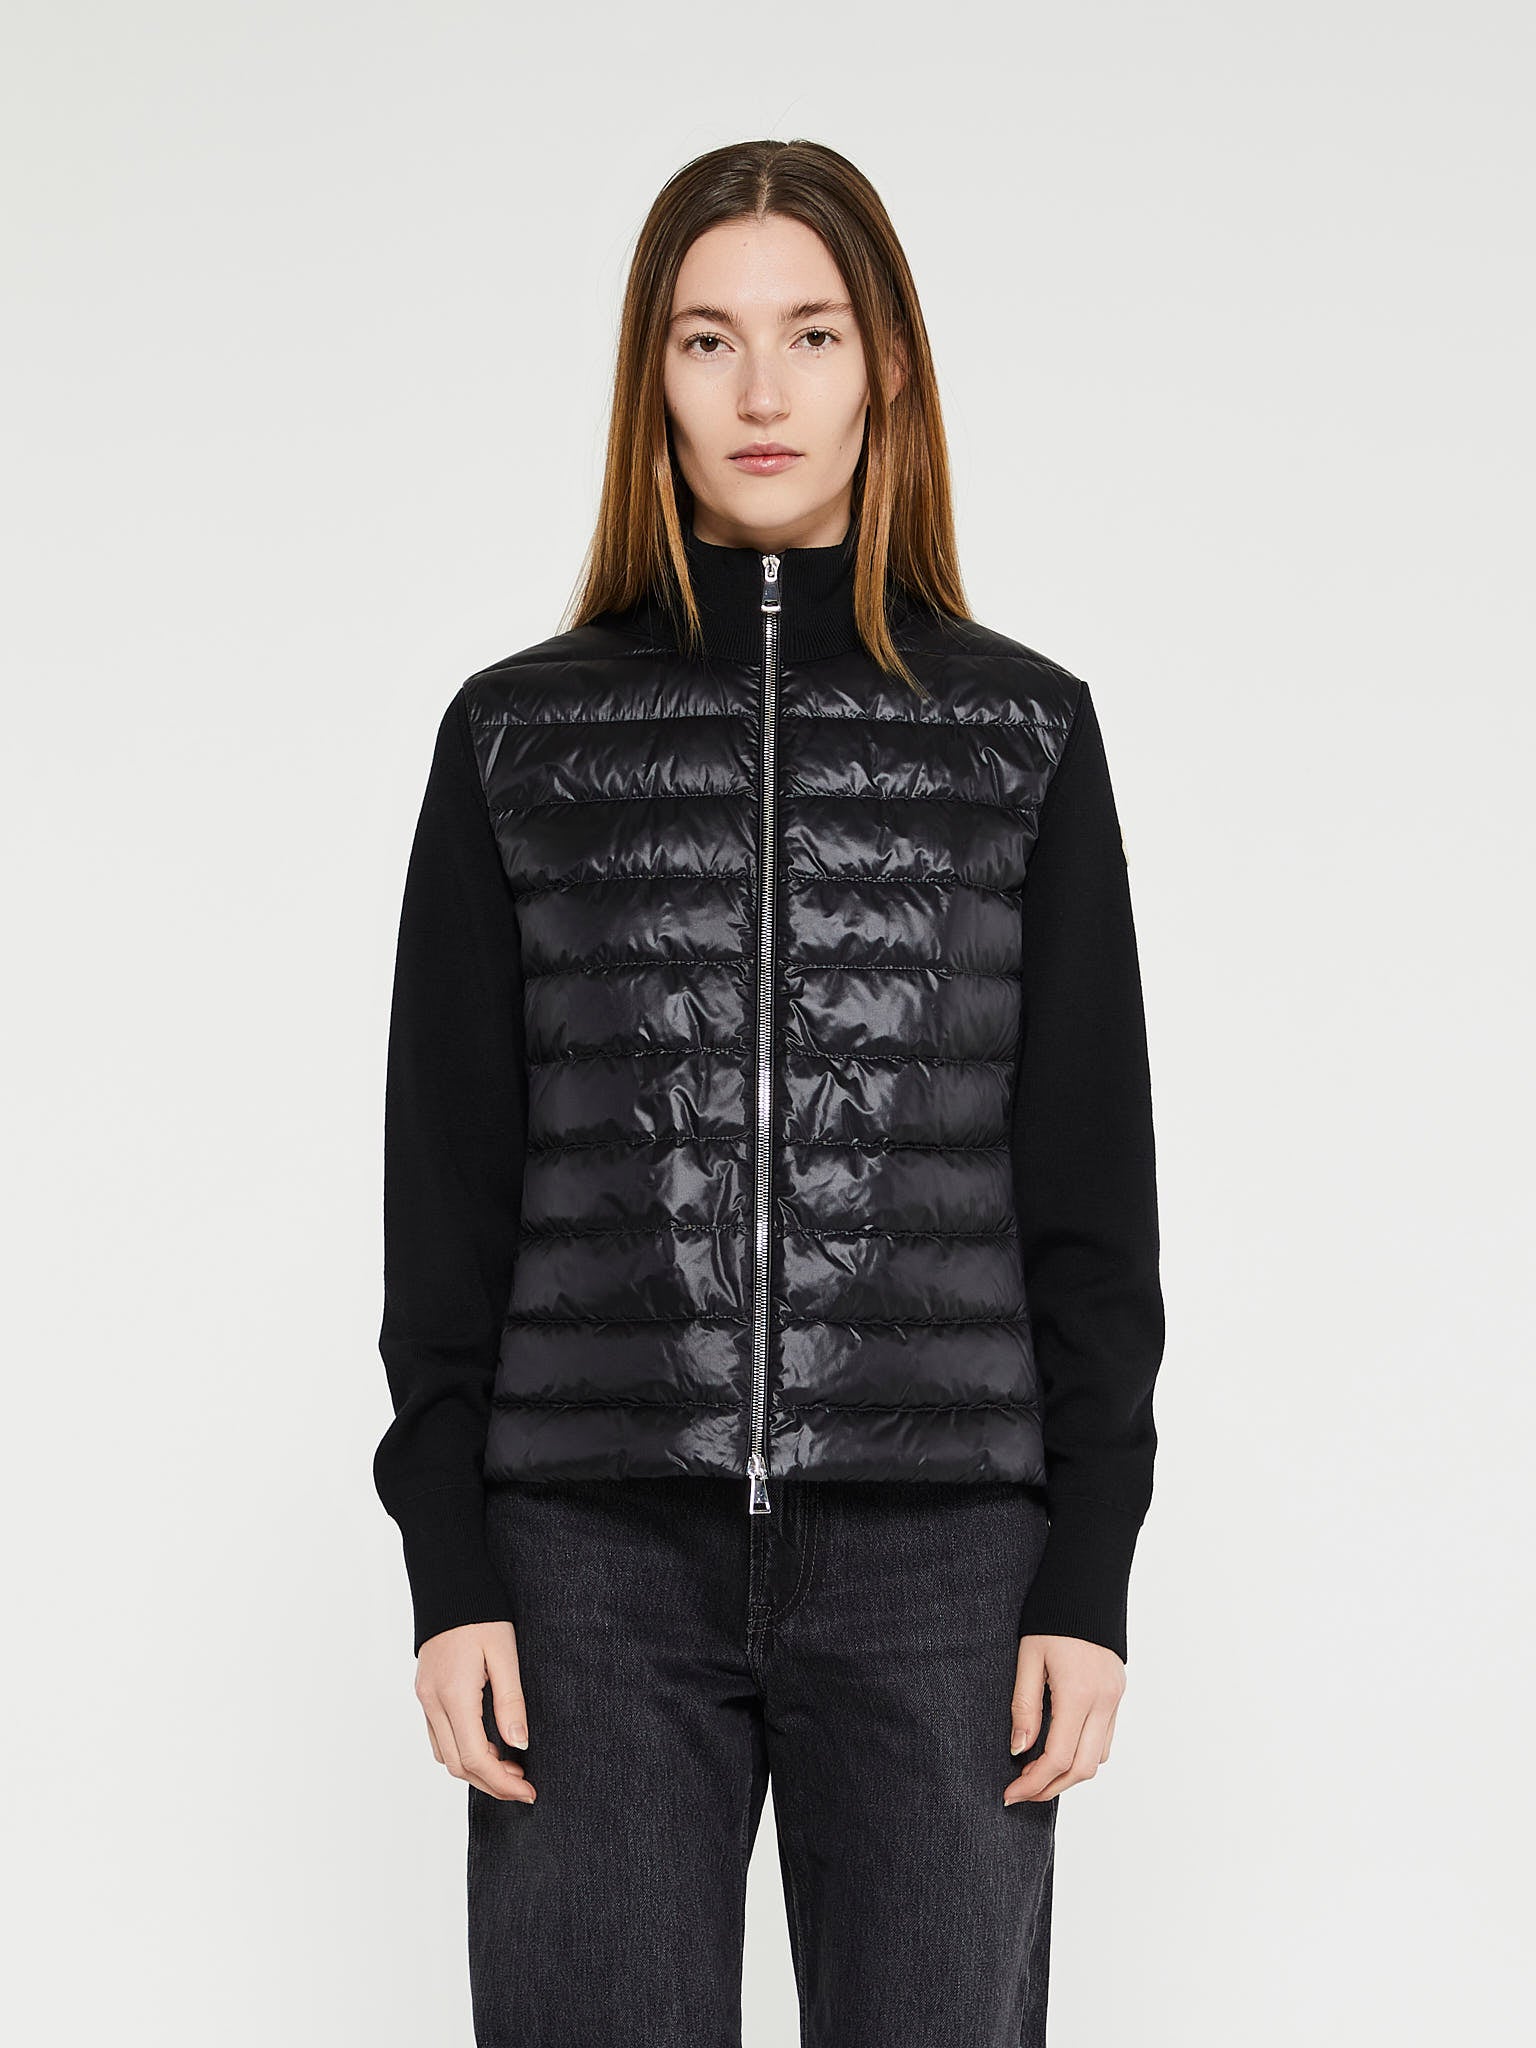 selection & at Coats | stoy for women Shop the Jackets